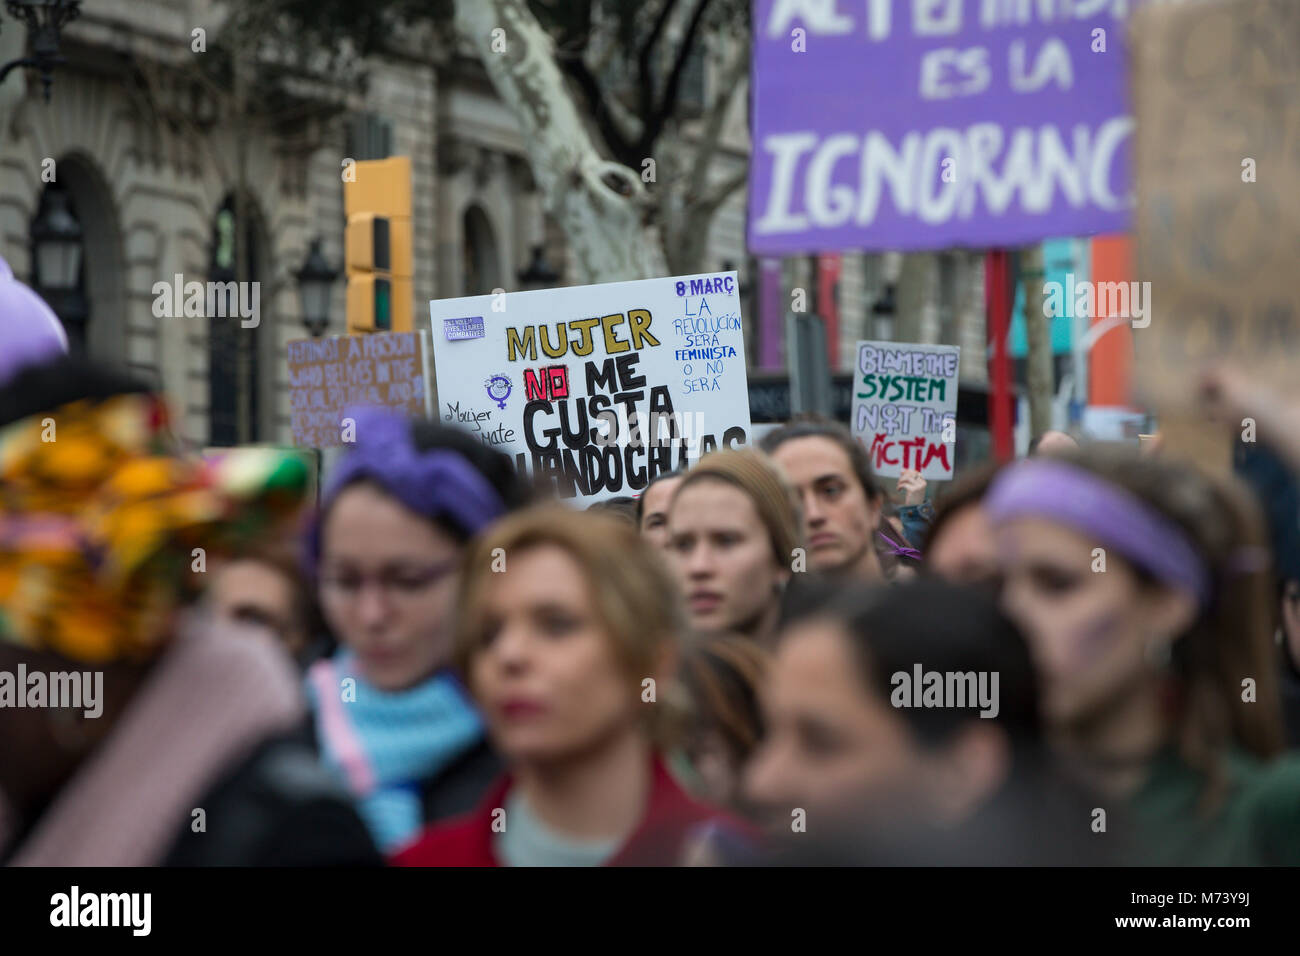 Barcelona, Spain. 08th Mar, 2018. Feminist demonstration held in the city of Barcelona to claim equal rights for working women on March 8, 2018 in the Paseo de Gracia in Barcelona. Credit: Gtres Información más Comuniación on line, S.L./Alamy Live News Stock Photo